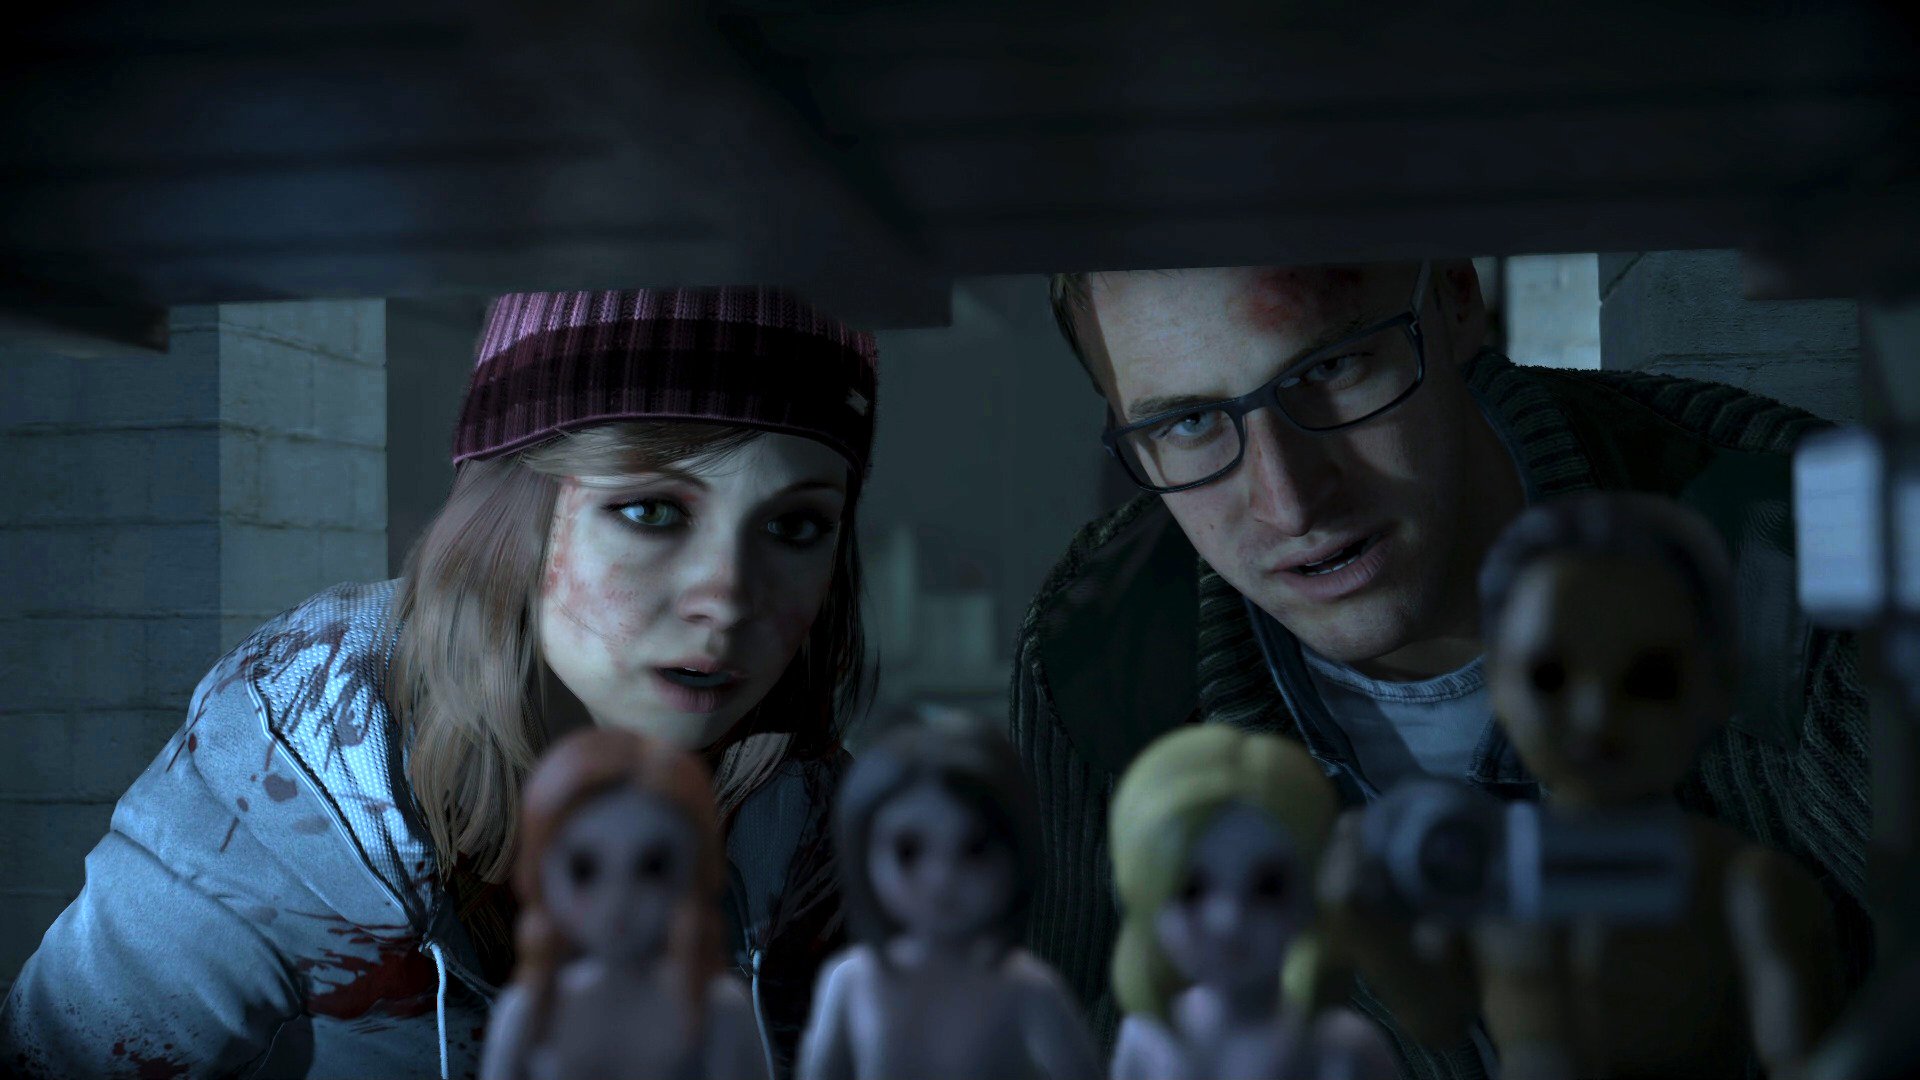 Ashley And Chris Until Dawn Hd Wallpaper Background Image 1920x1080 Id 633495 Wallpaper